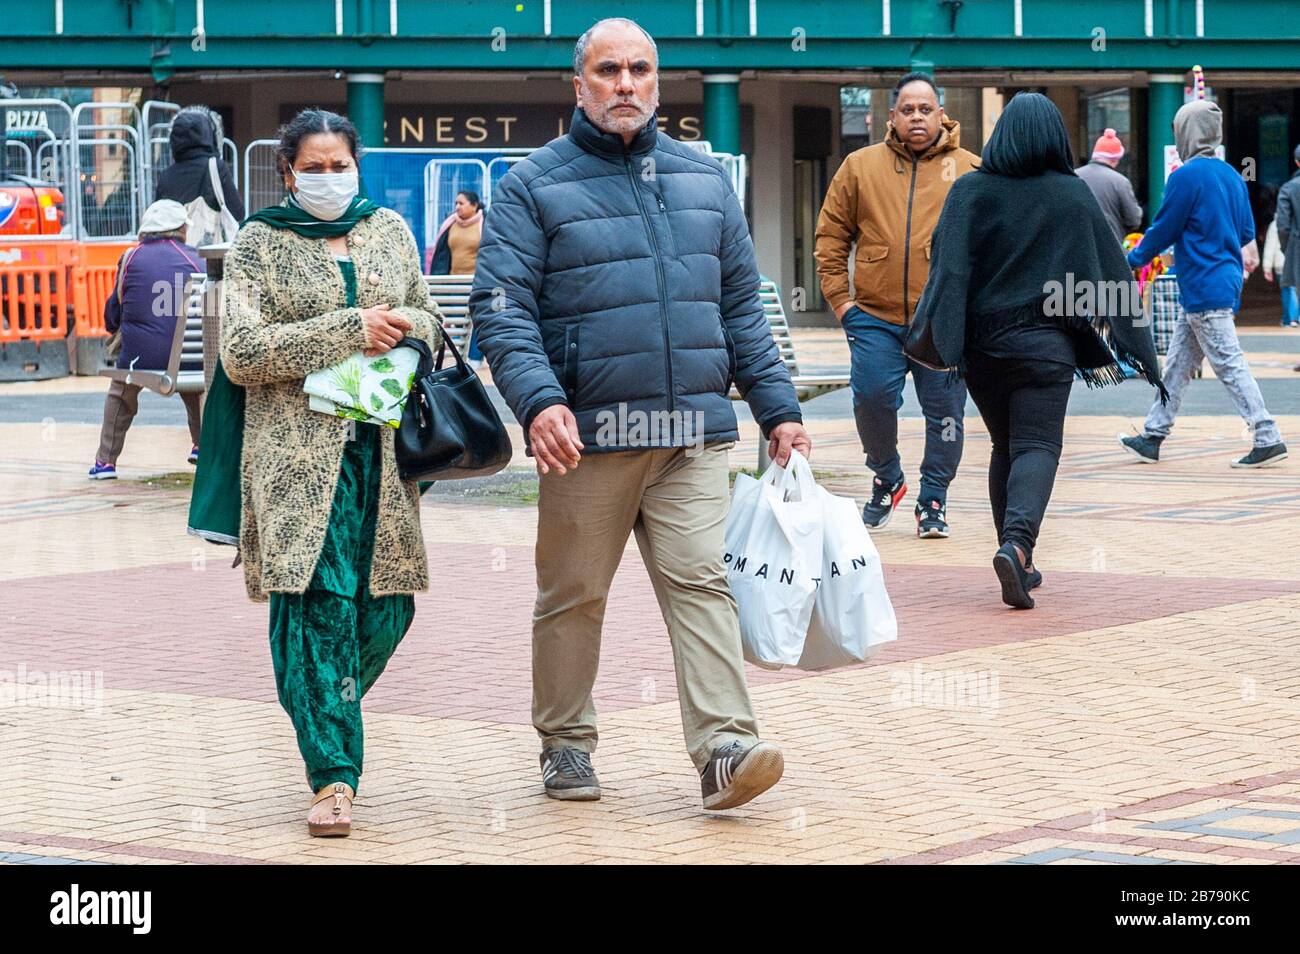 Coventry, West Midlands, UK. 14th Mar, 2020. The Coronavirus pandemic forced shoppers to wear protective masks in Coventry city centre this morning. Credit: Andy Gibson/Alamy Live News Stock Photo